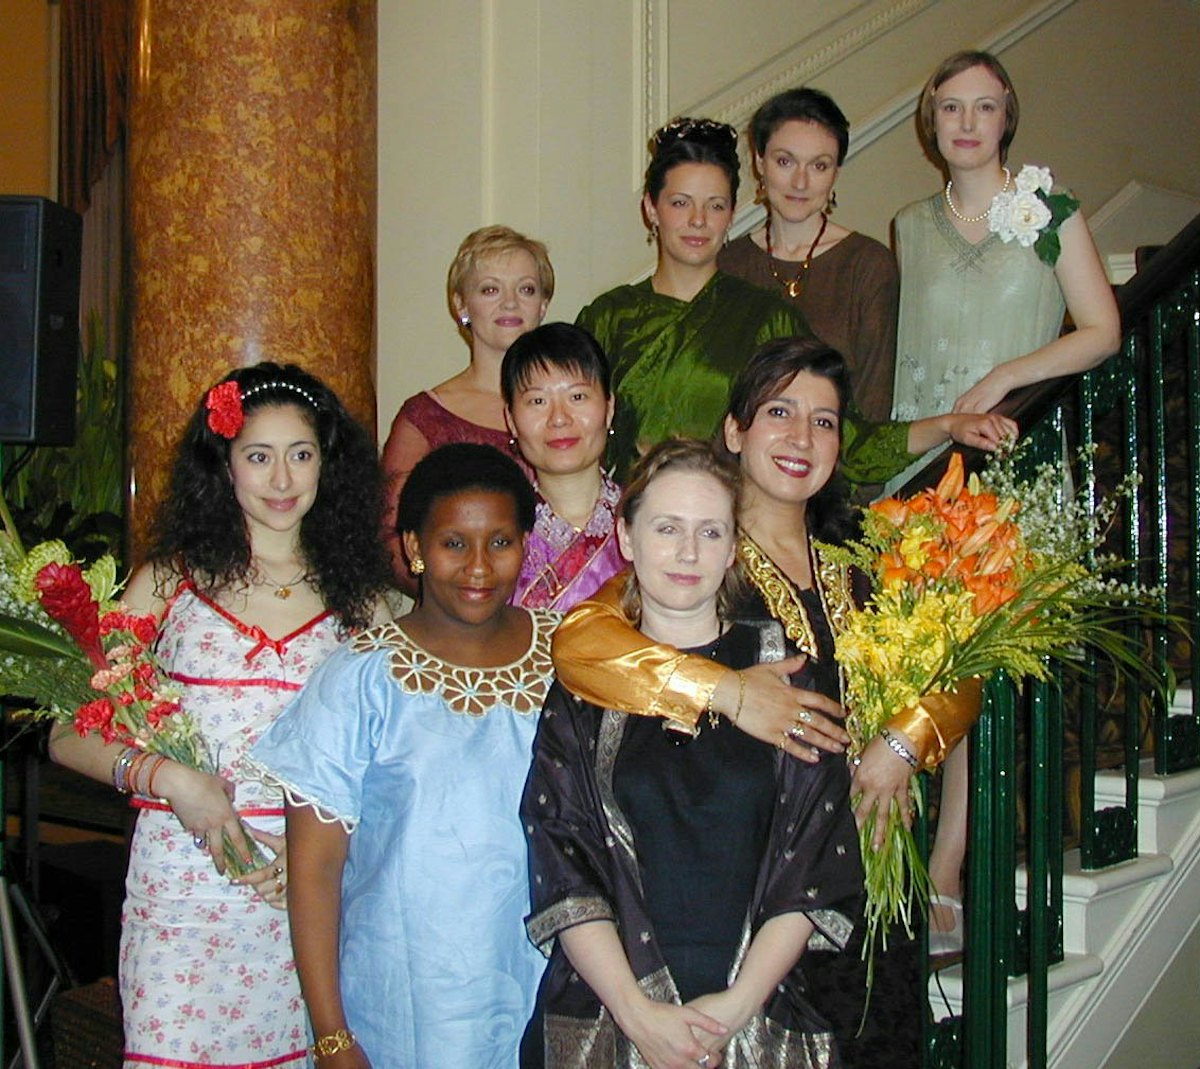 The cast of performers at an Arts for Nature tribute honoring Madame Ruhiyyih Rabbani, held 15 May 2001 in London at Canada House. The event featured not only a dramatic narrative produced especially for the occasion but also several musical numbers.